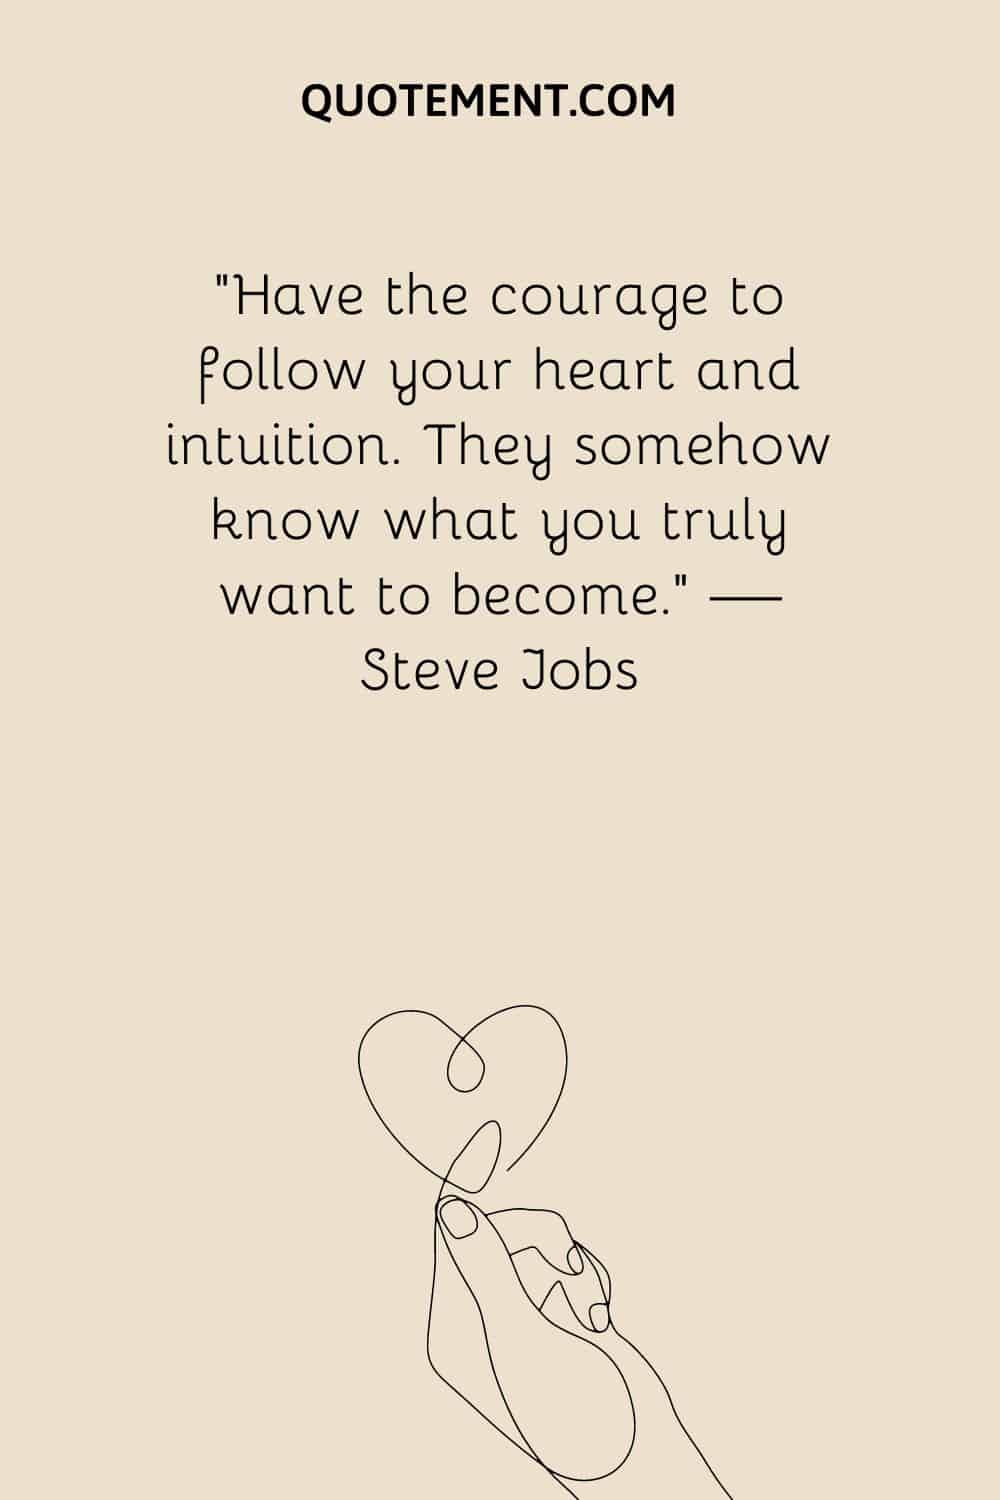 Have the courage to follow your heart and intuition. They somehow know what you truly want to become